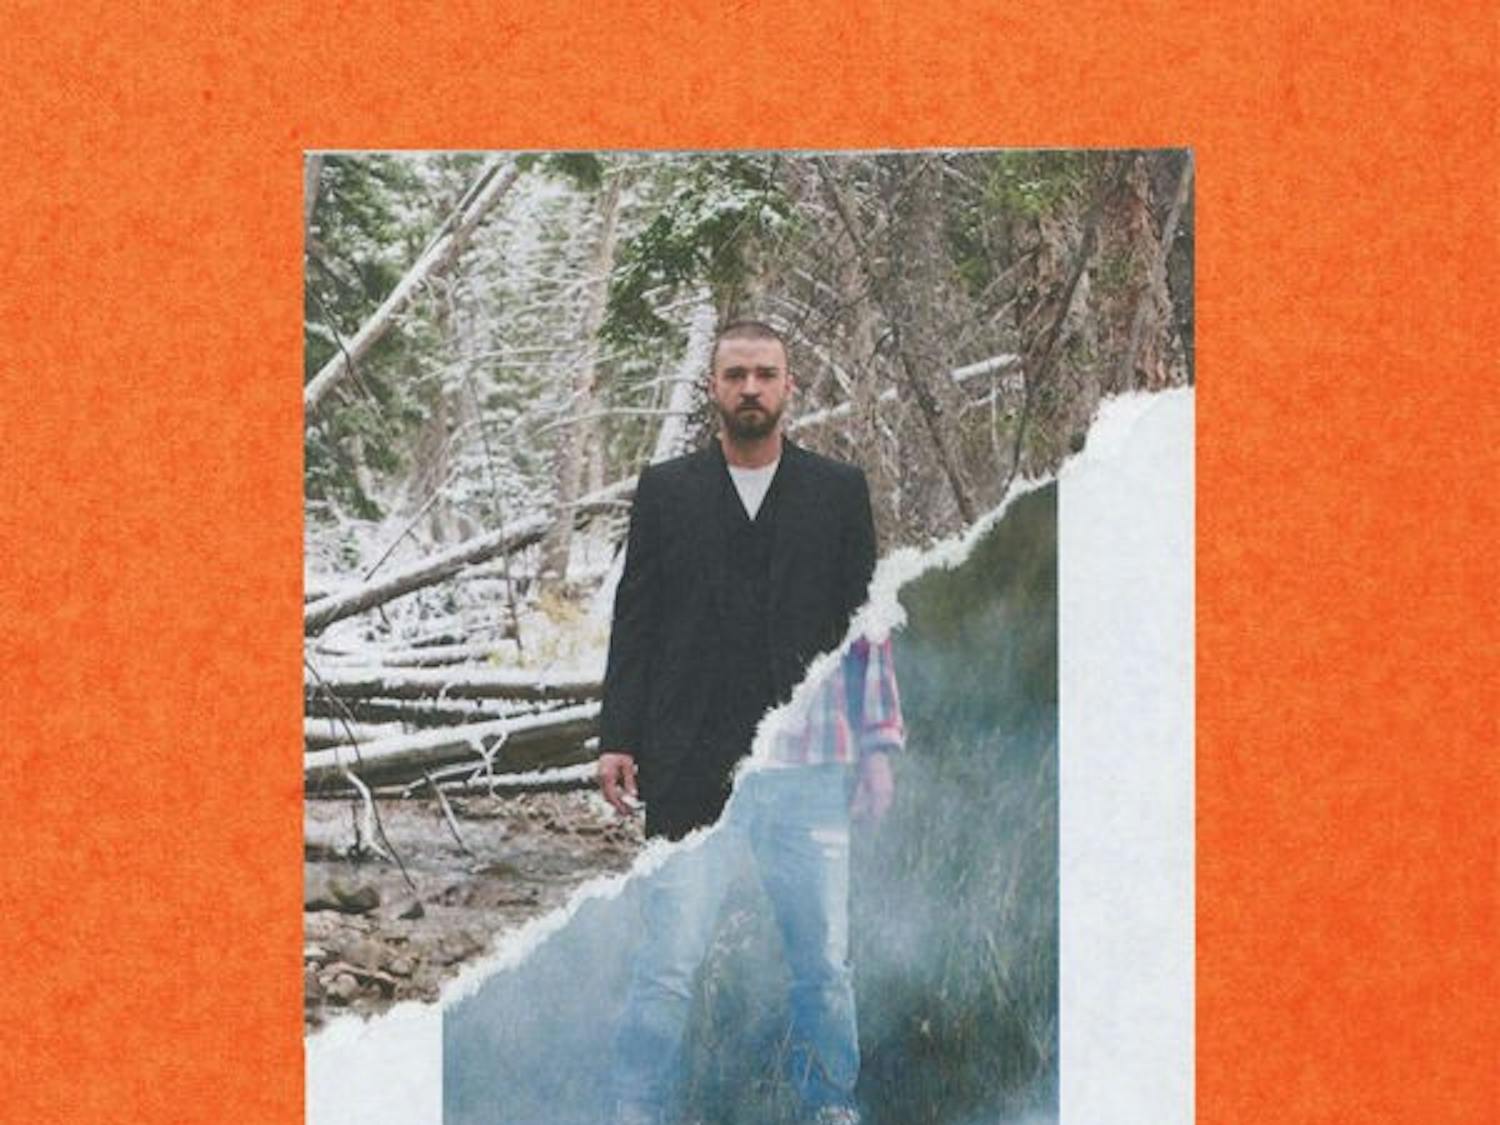 With conflicting concepts and&nbsp;contradicting lyrics, Timberlake's attempt to combine "modern Americana with 808s"&nbsp;is a failed experiment.